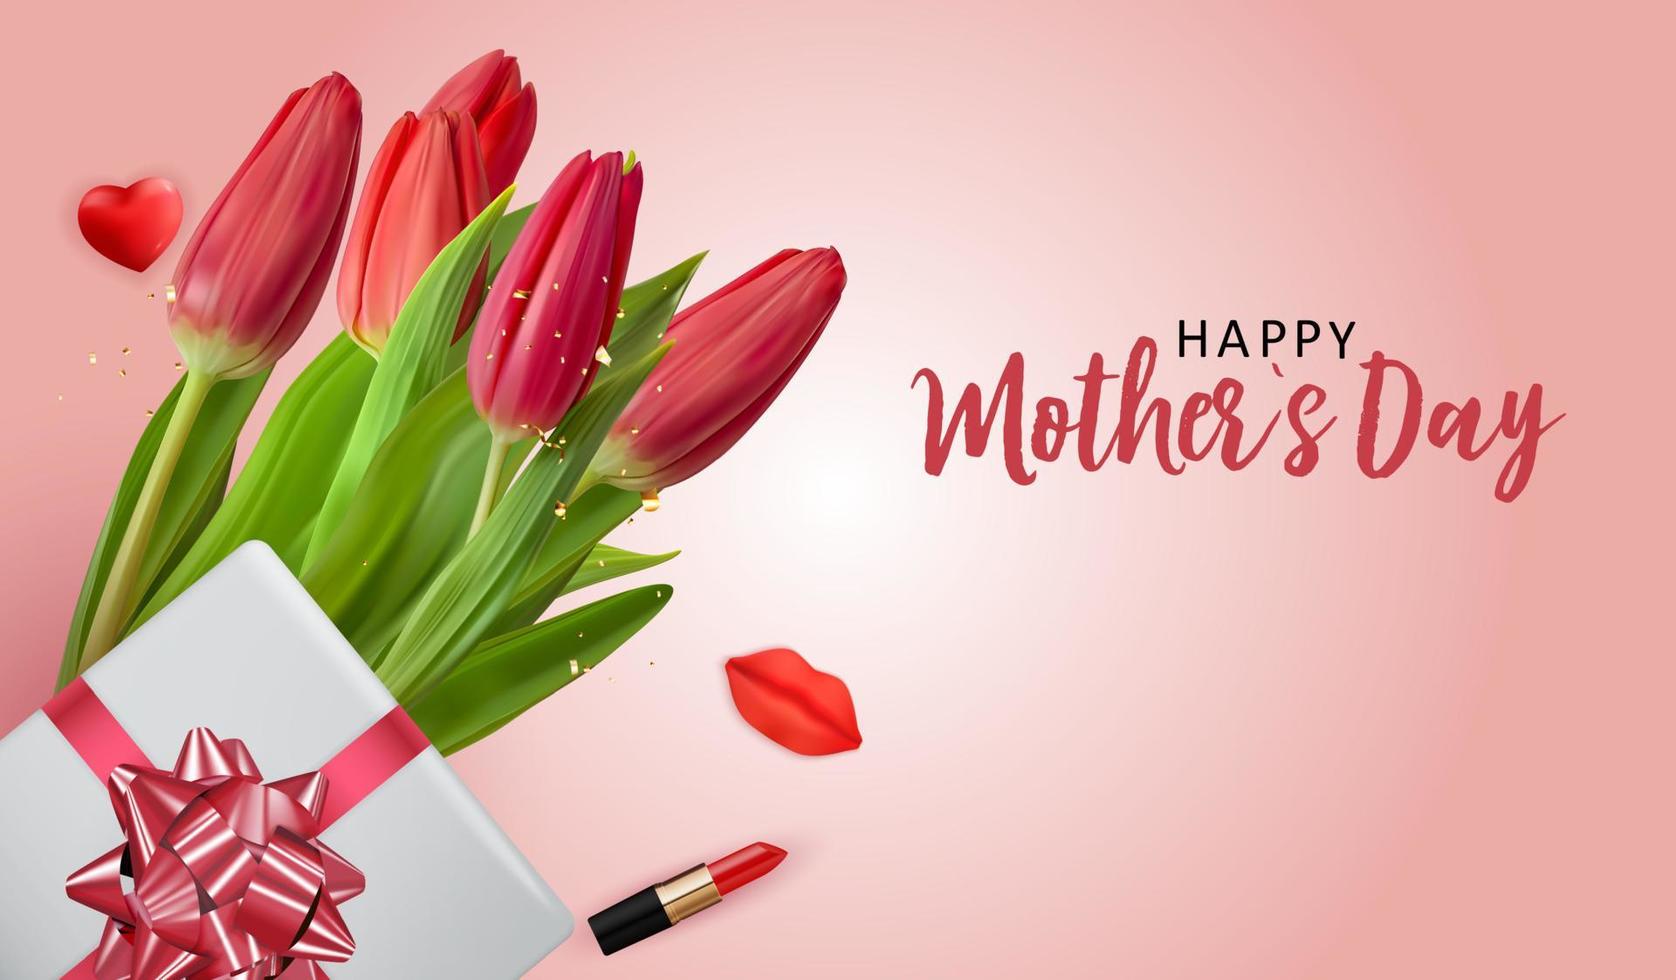 Happy Mothers Day Background with Realistic Tulip flowers and gift box. Vector Illustration